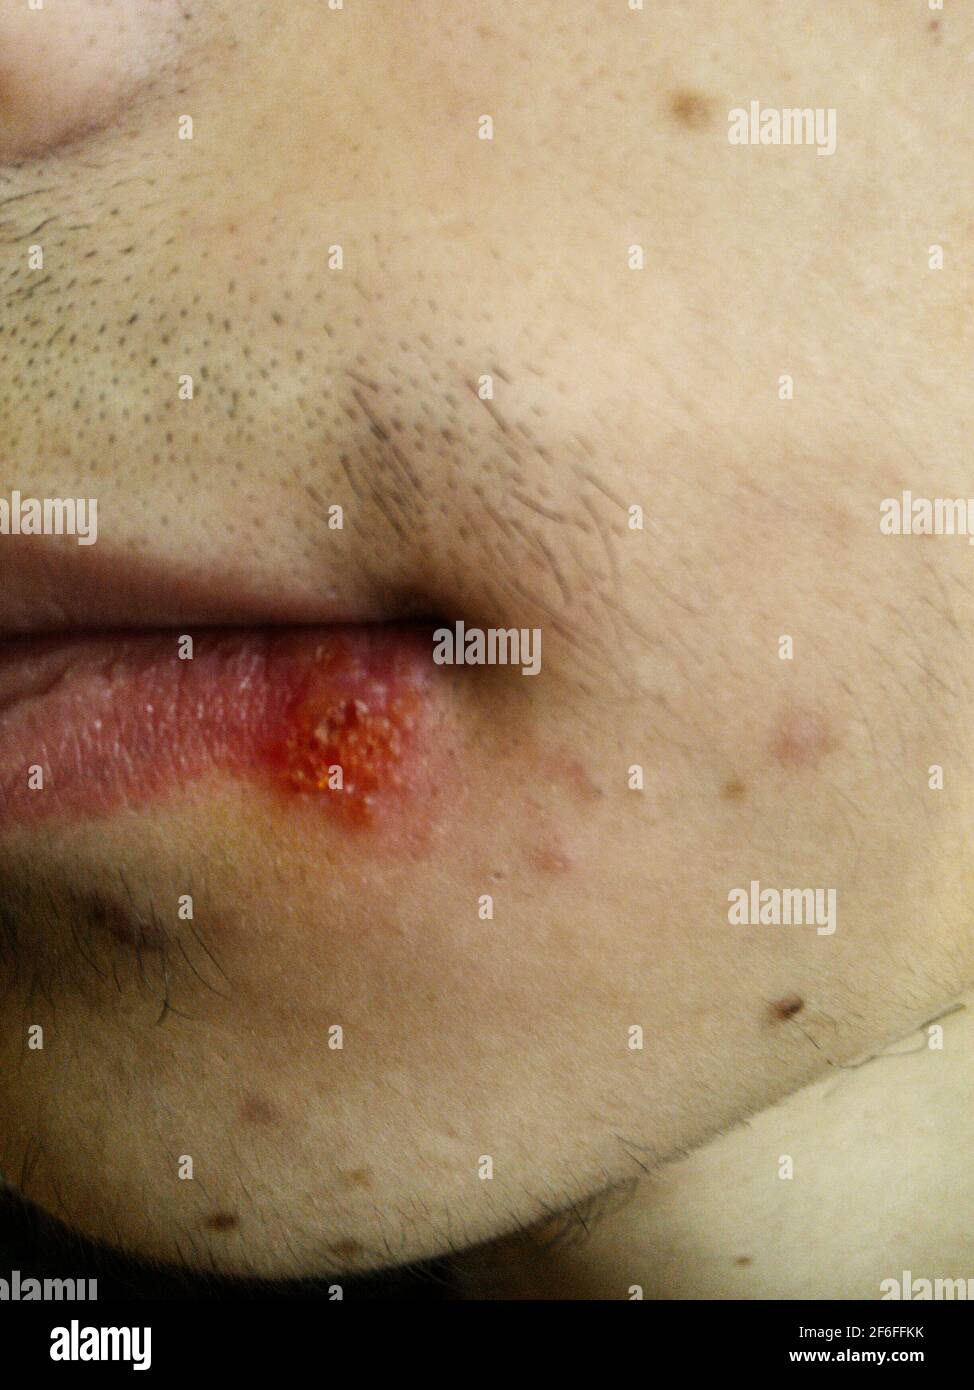 Close-up of a teenager's mouth with herpes simplex Stock Photo